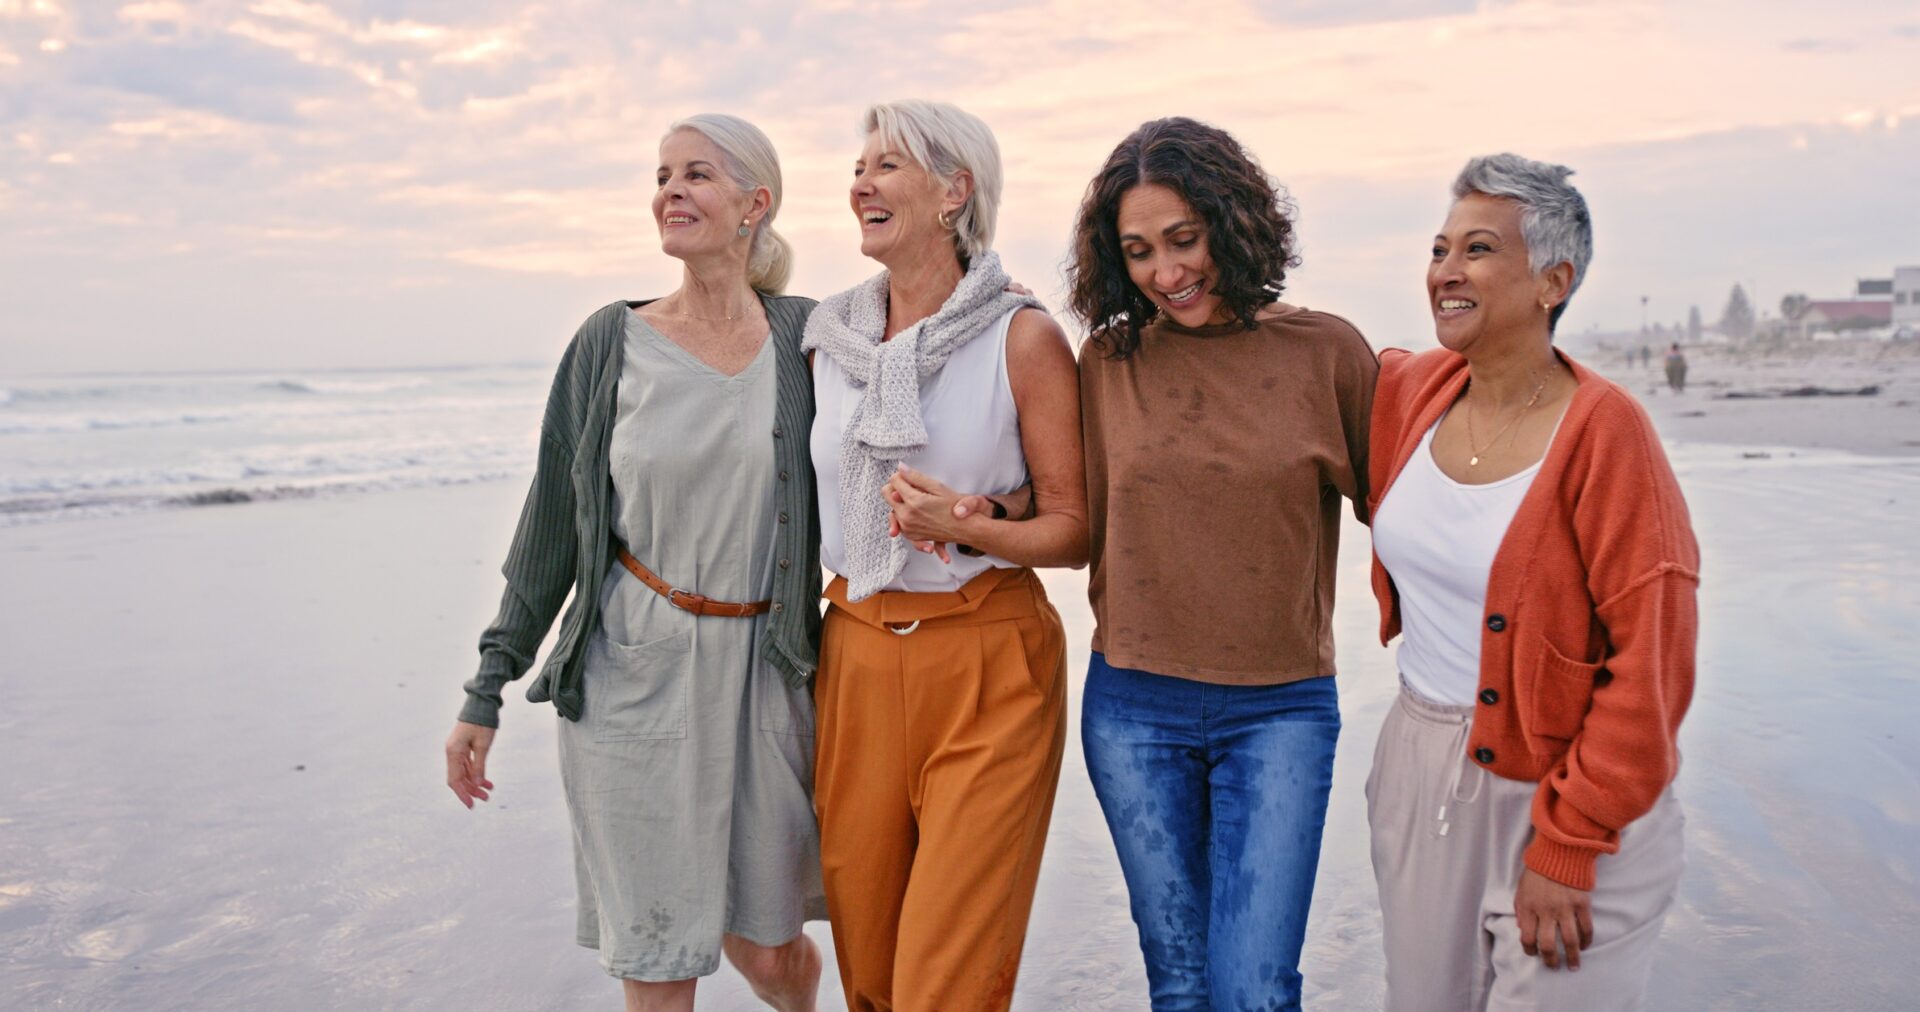 Beach, friends and vacation with a senior woman group walking on the sand by the sea or ocean. Nature, water and friendship with diversity and mature females laughing at sunset in her retirement